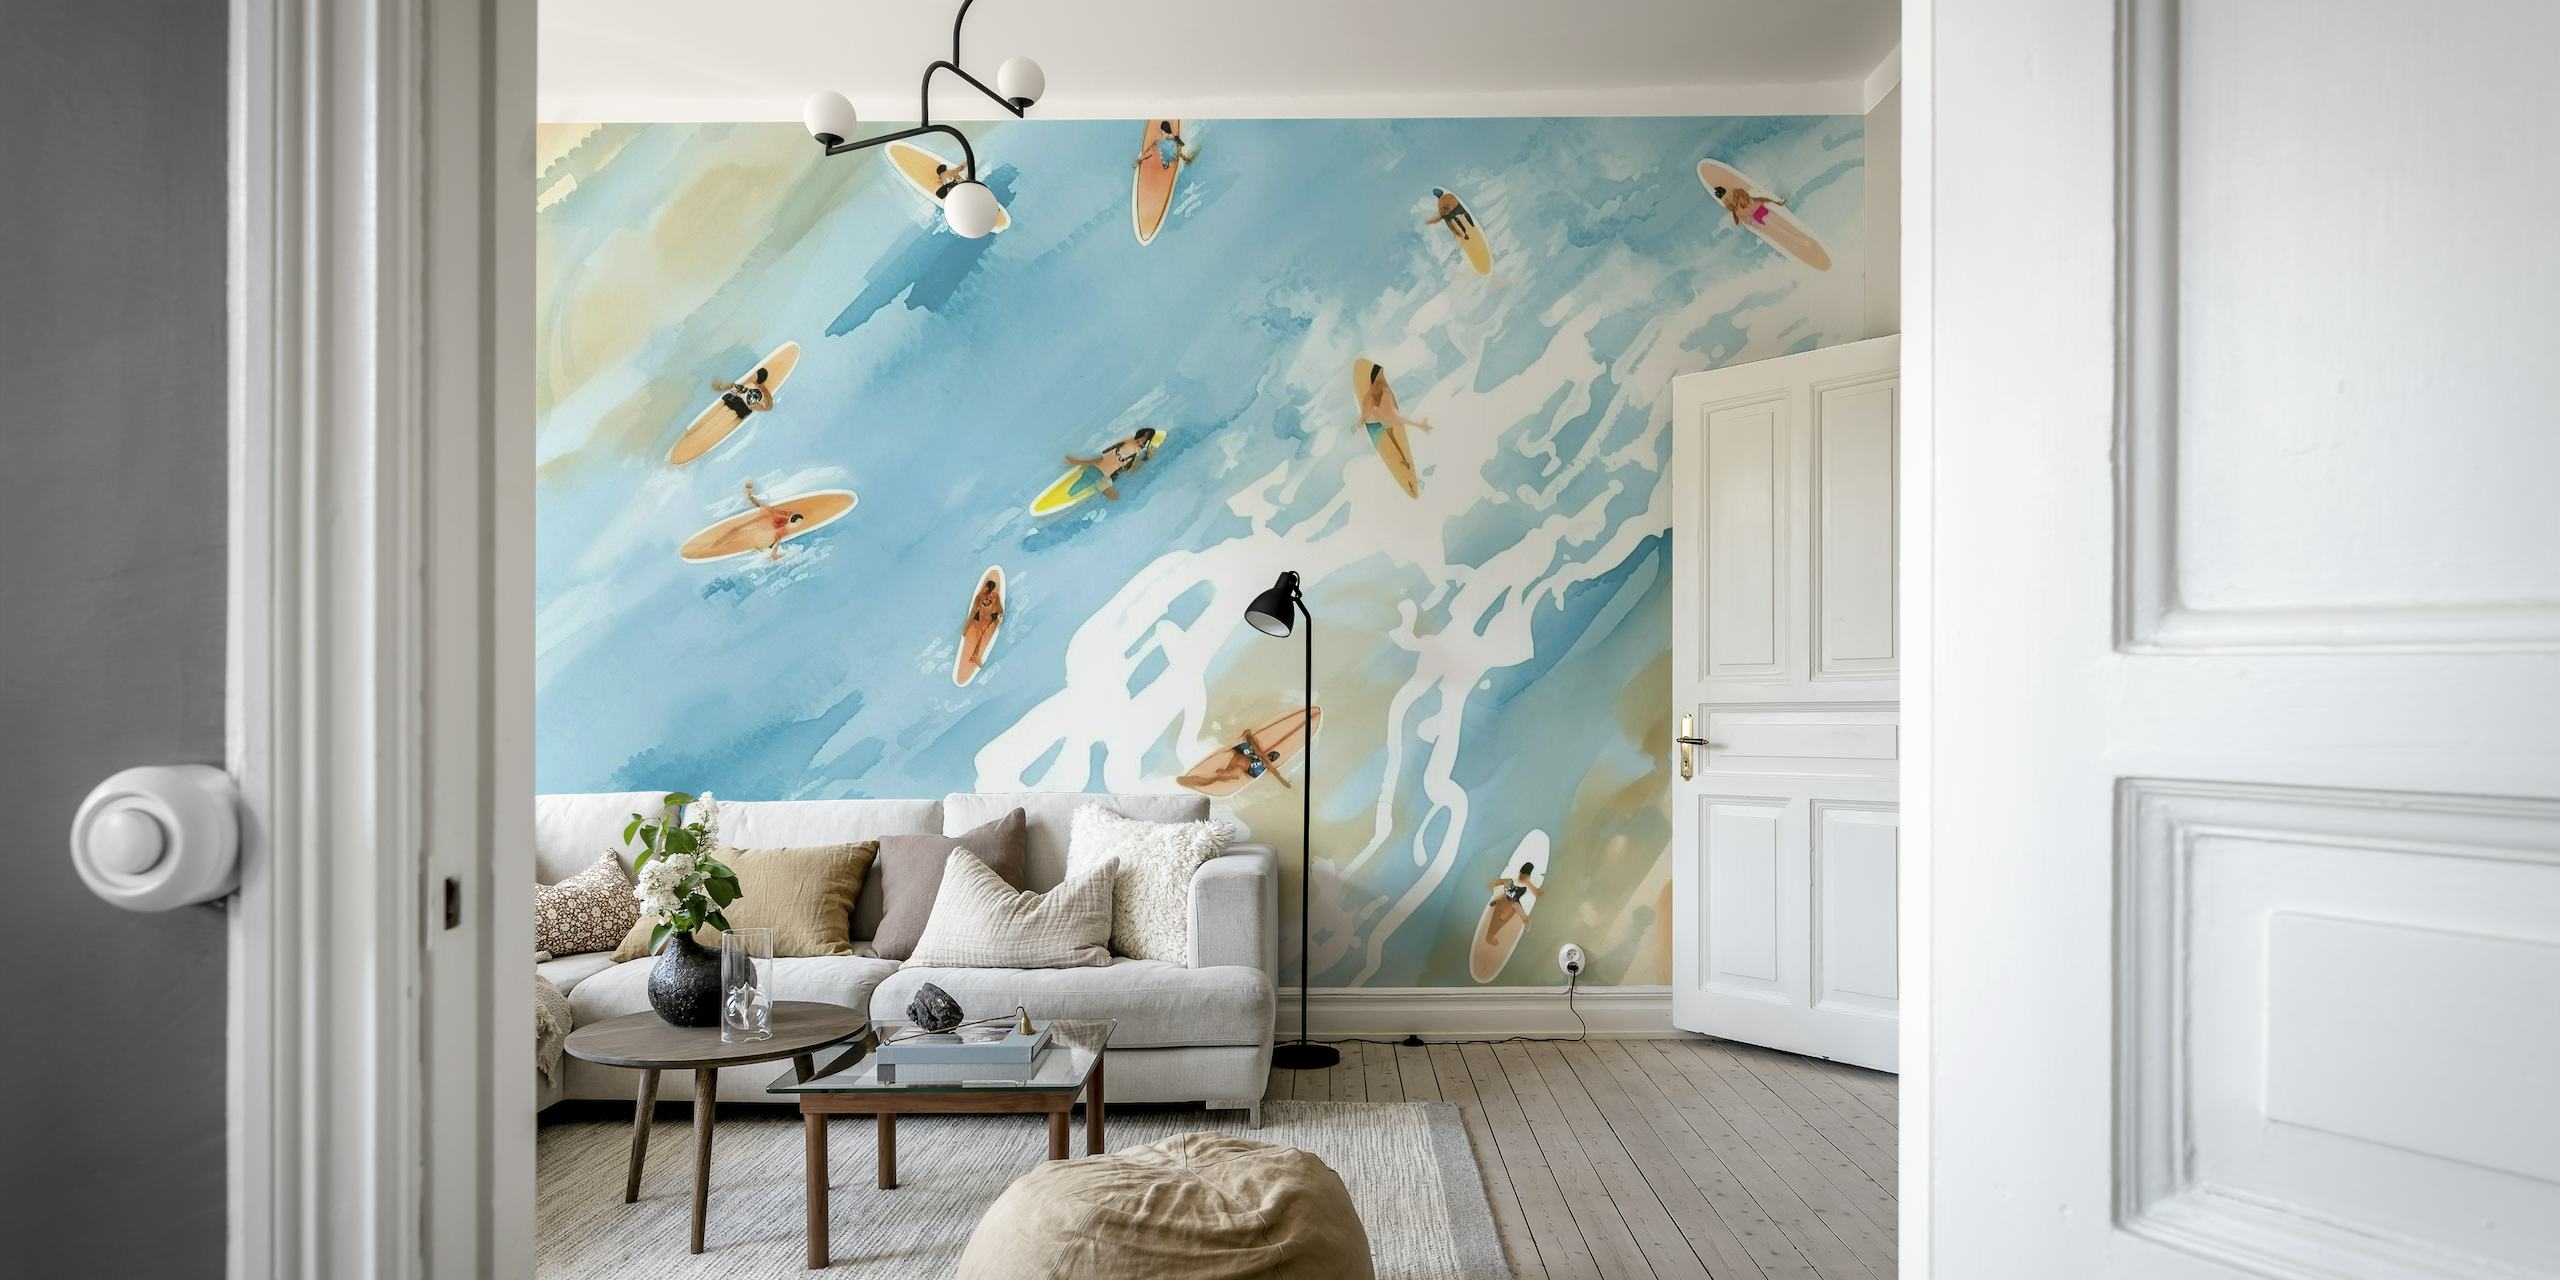 Surfers wall mural with aerial view of individuals surfing on gentle waves